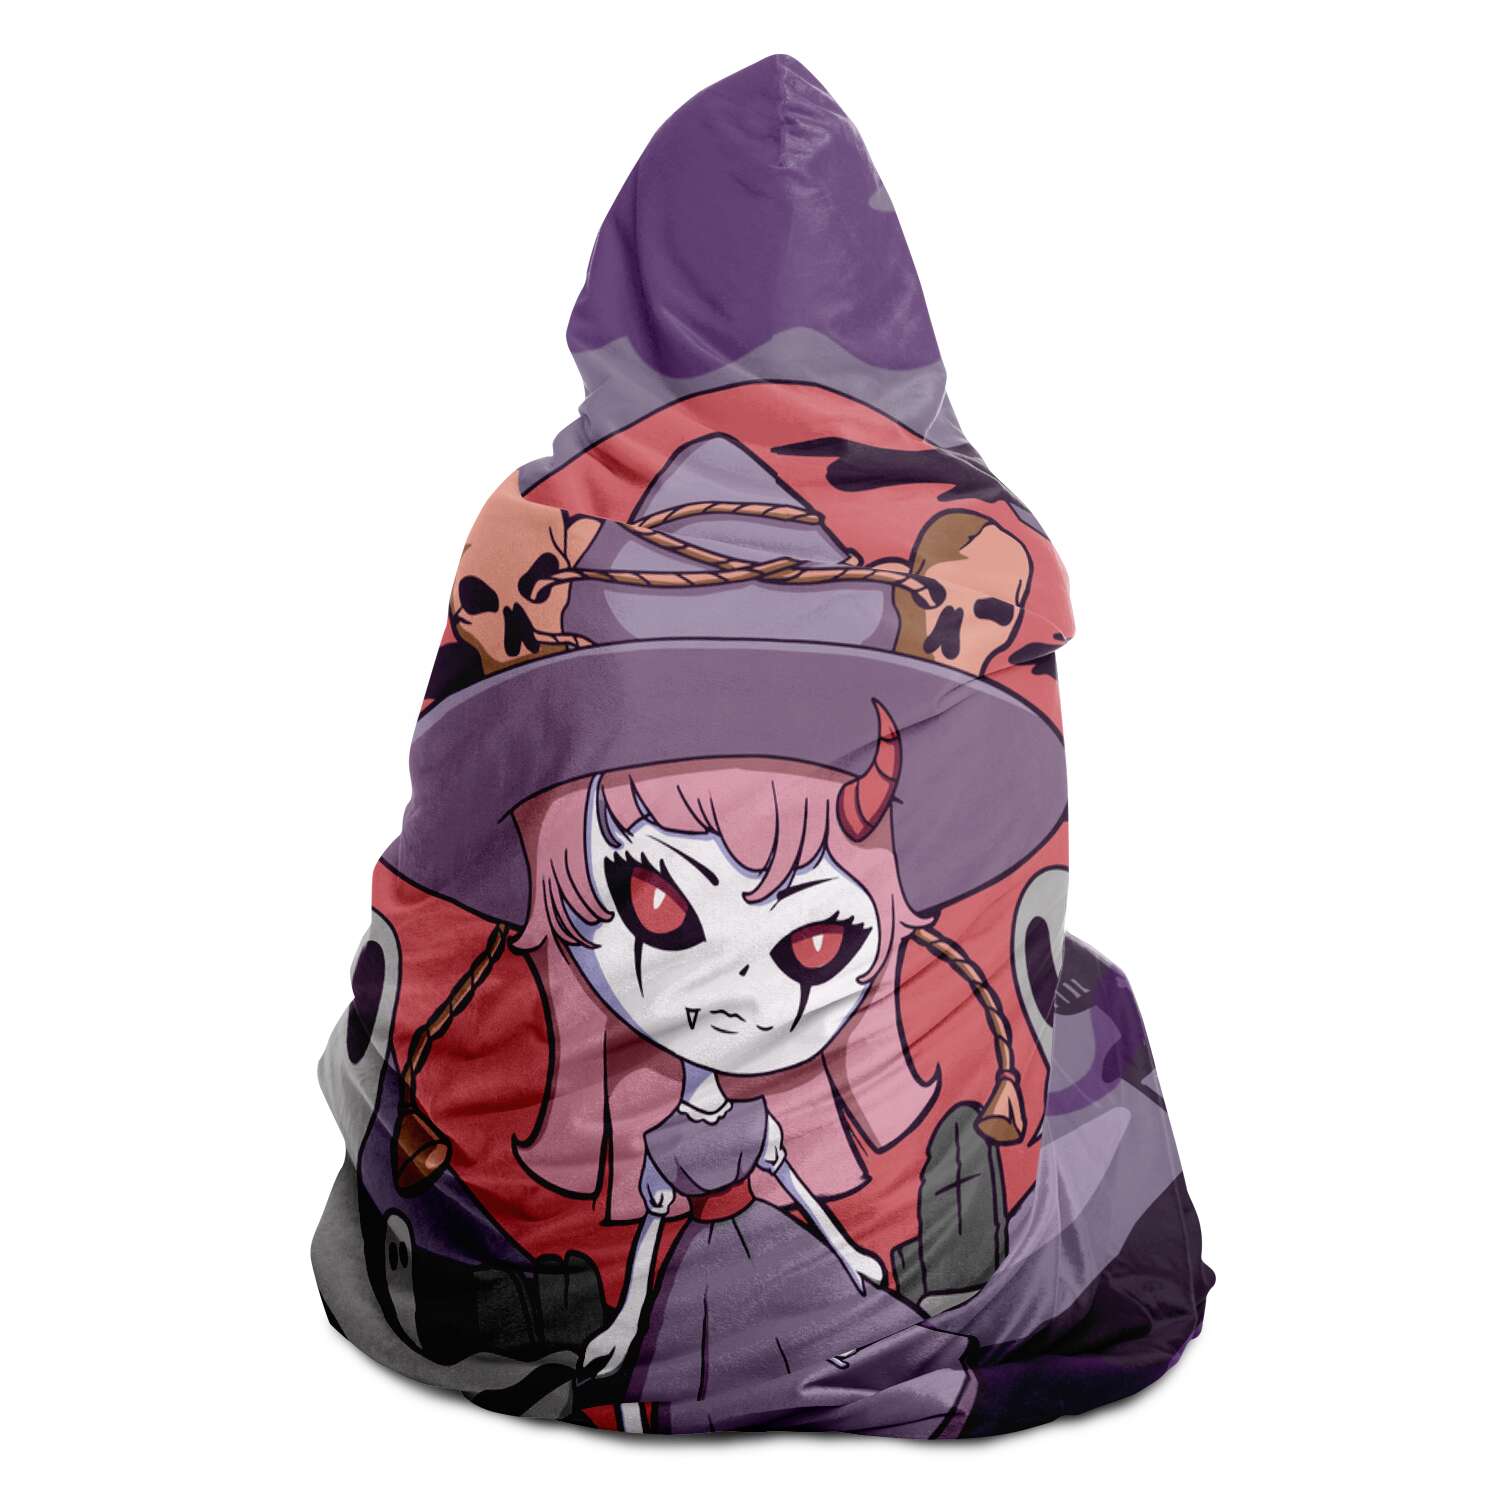 Witchy Doll Hooded Blanket